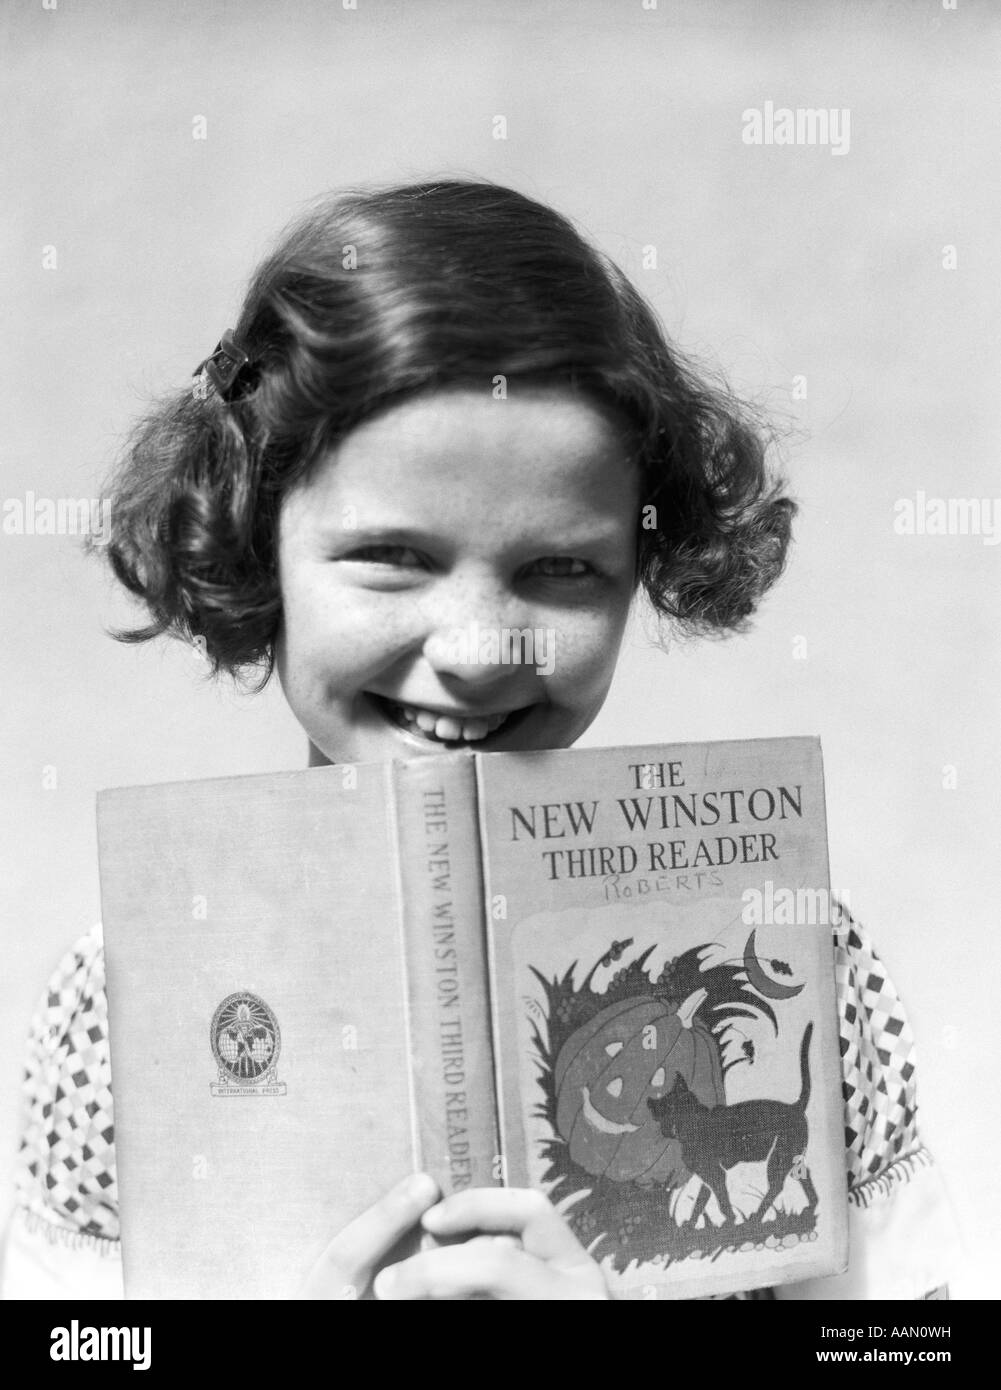 1930s SMILING GIRL WITH BOBBED HAIR HOLDING AN OPEN THIRD GRADE READING BOOK Stock Photo